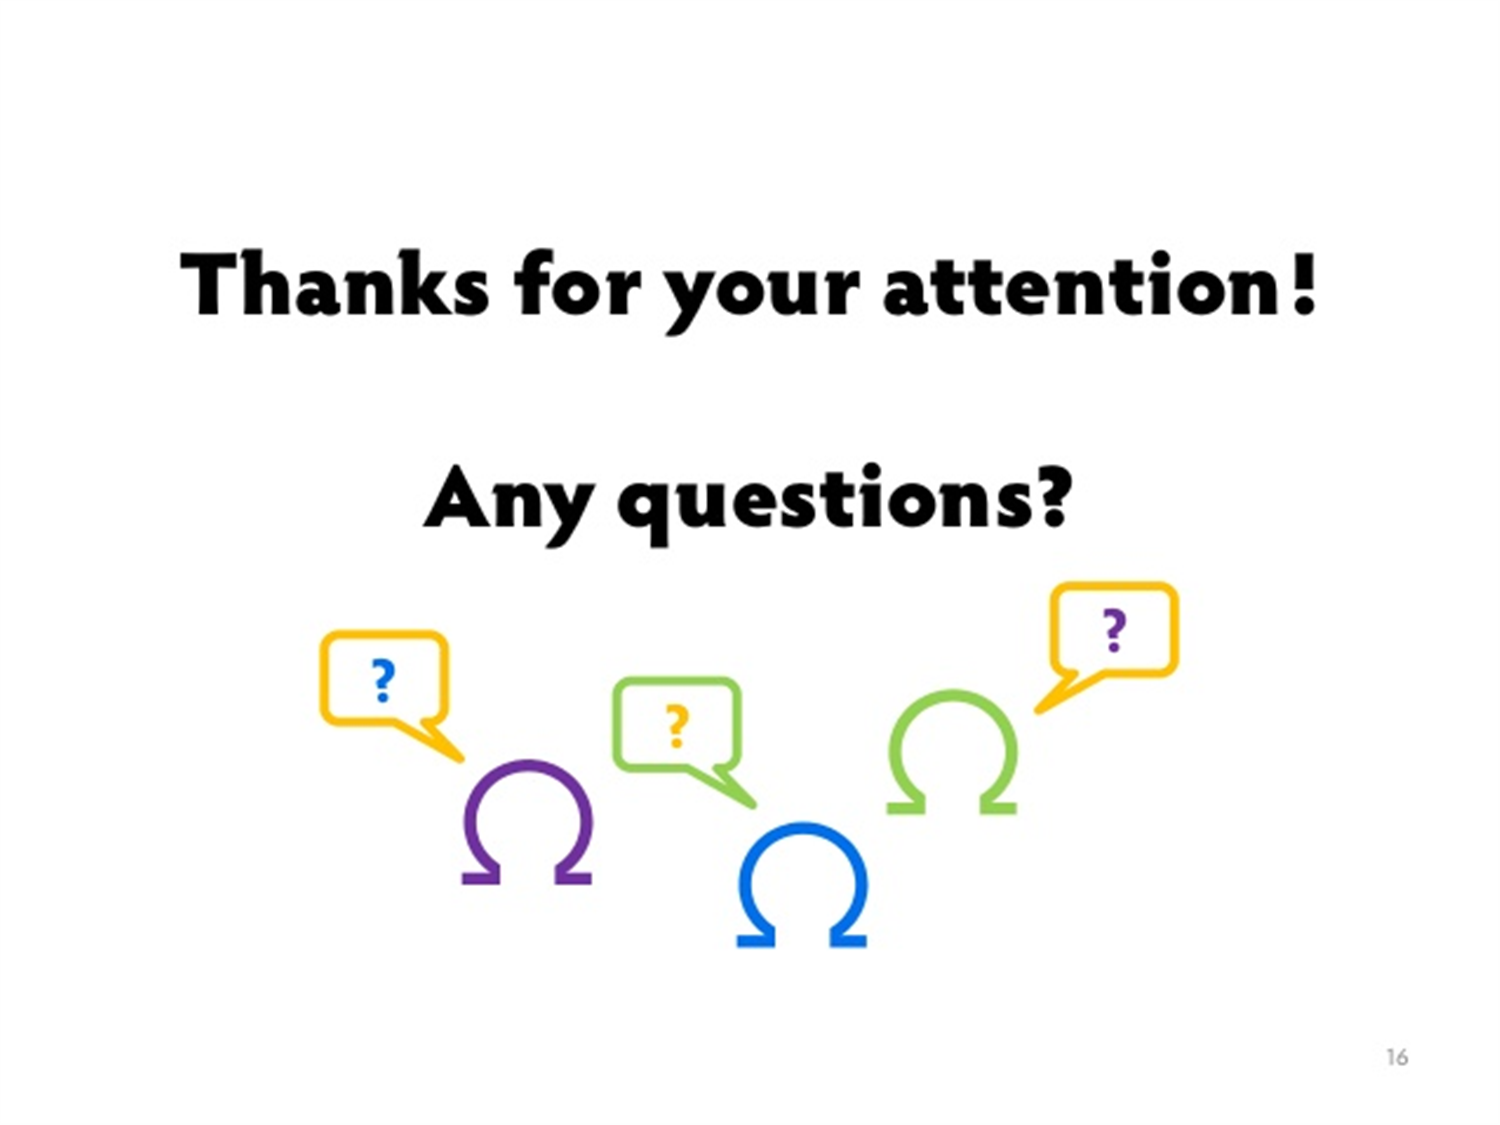 Thank you for your attention картинки для презентации. Thanks for your attention any questions. Thank you for attention any questions. Thanks for attention no questions please. Give your attention